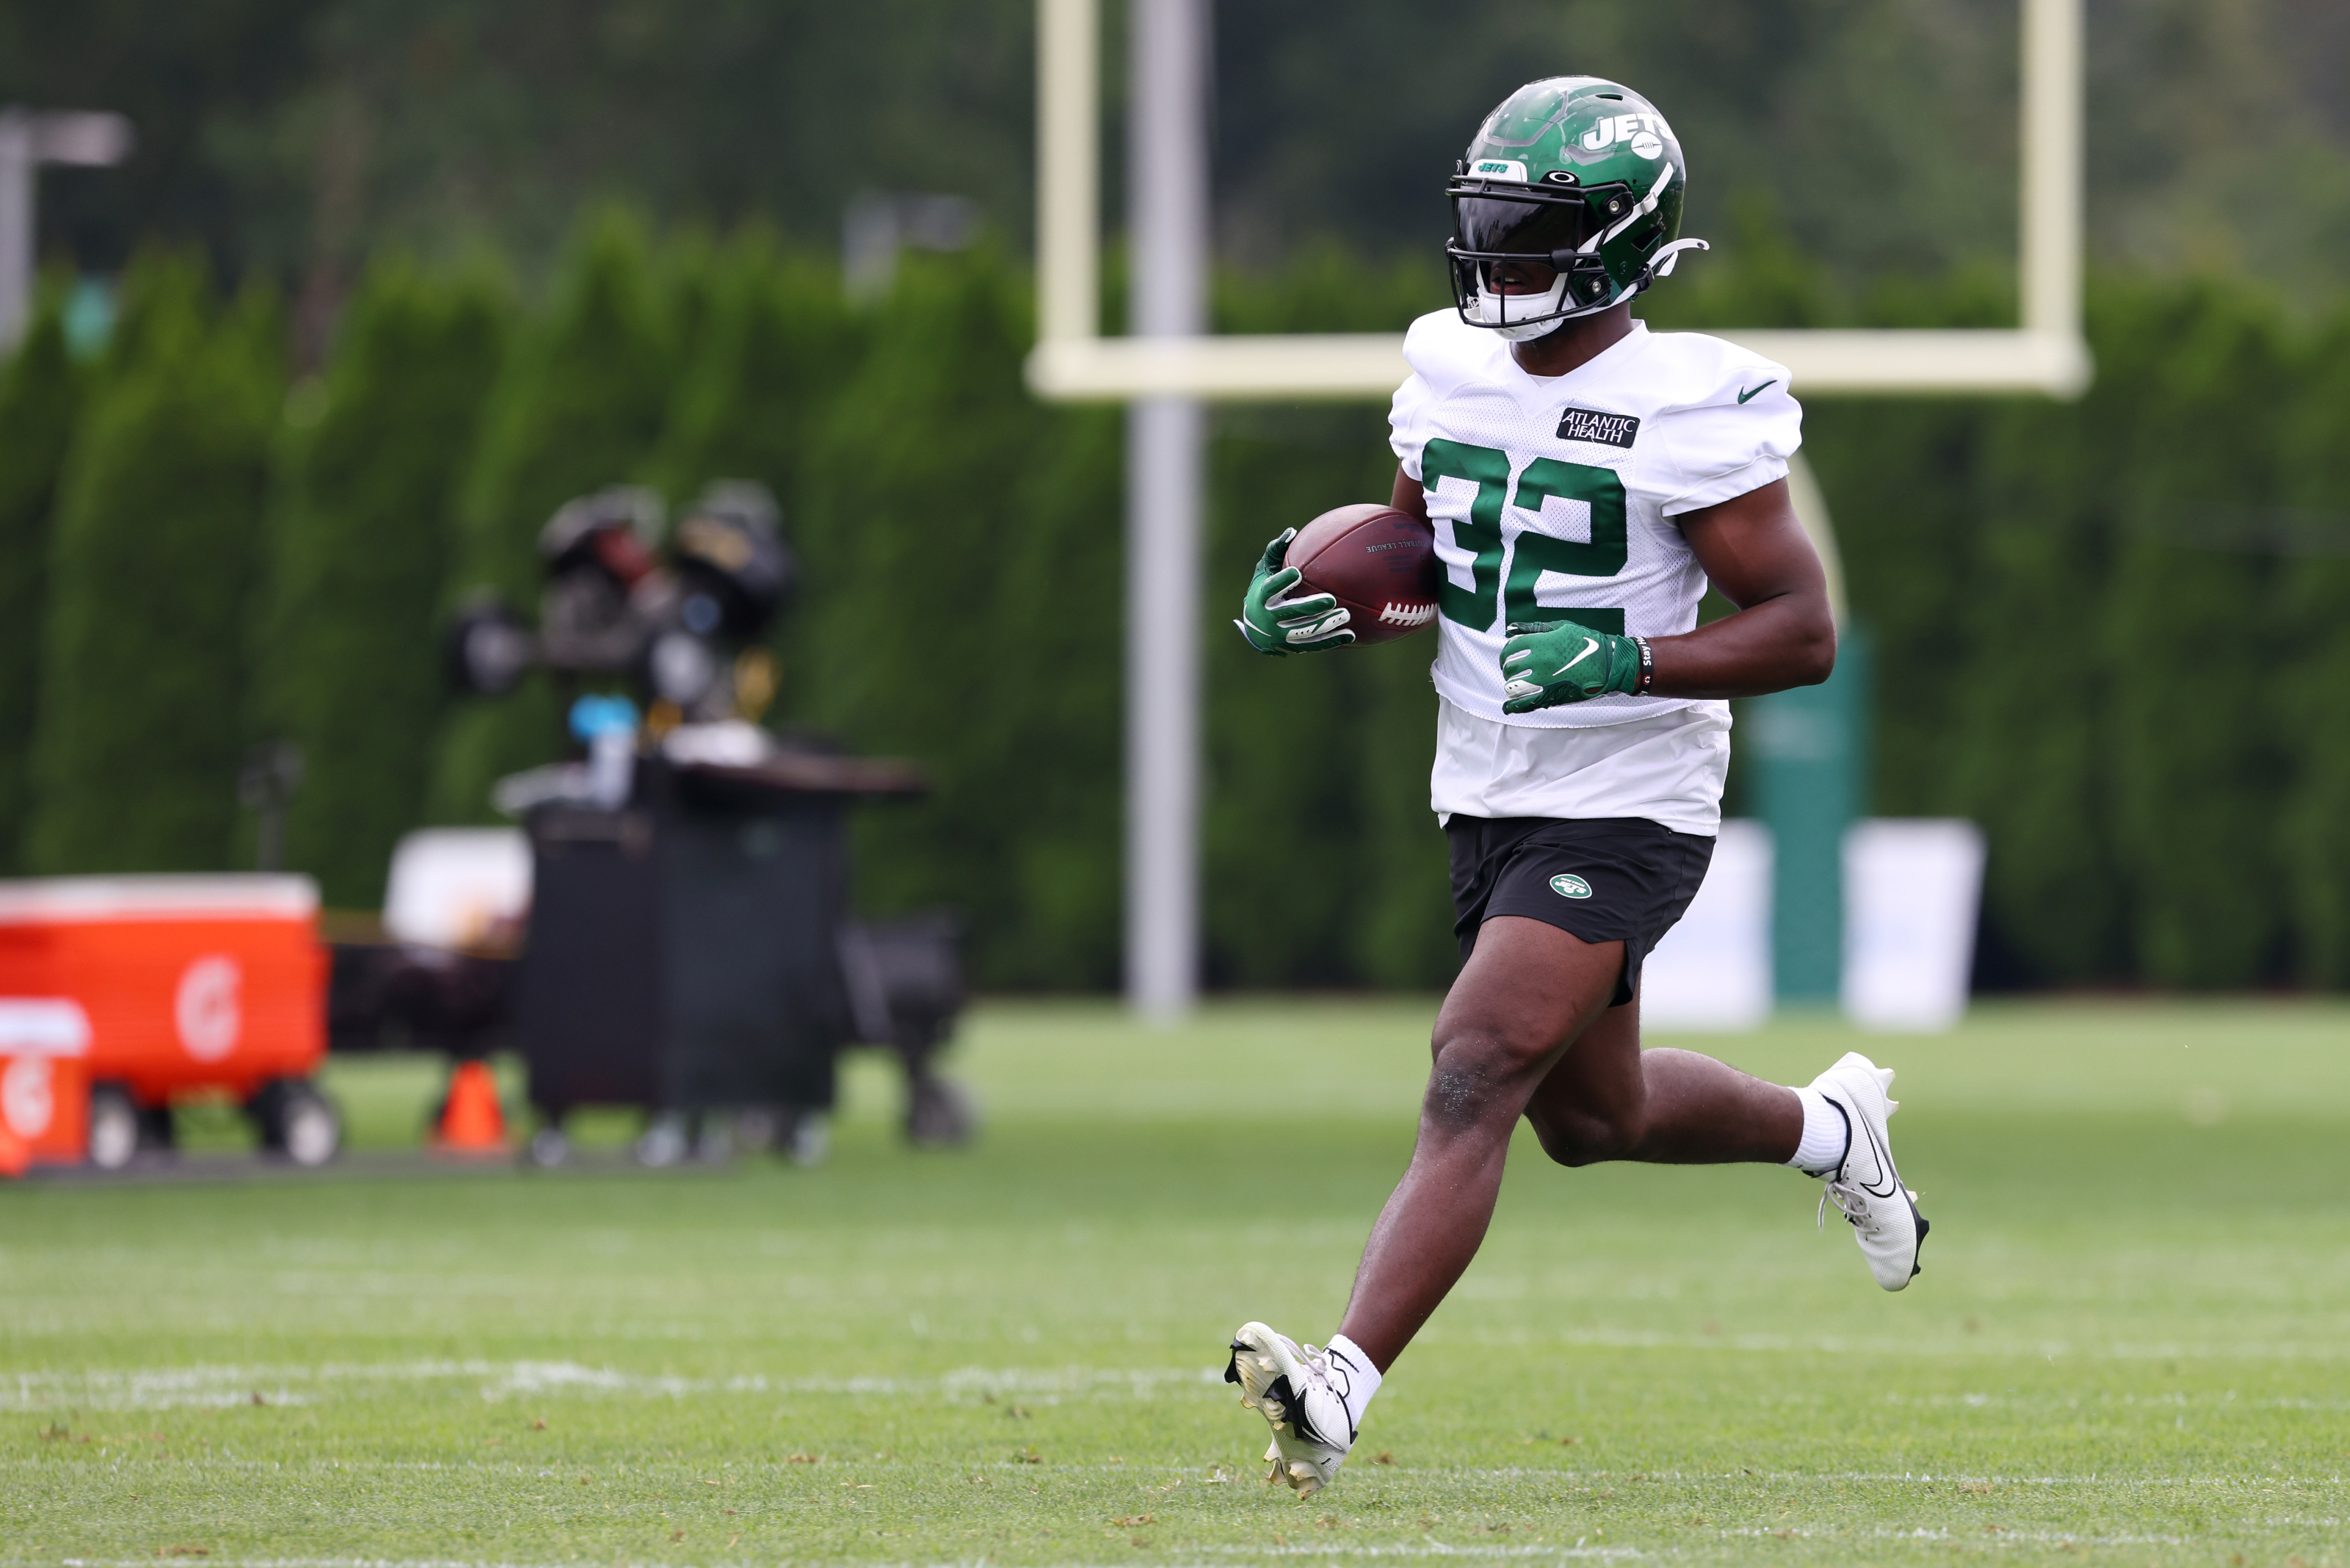 UNC Football: Michael Carter takes first team reps with New York Jets